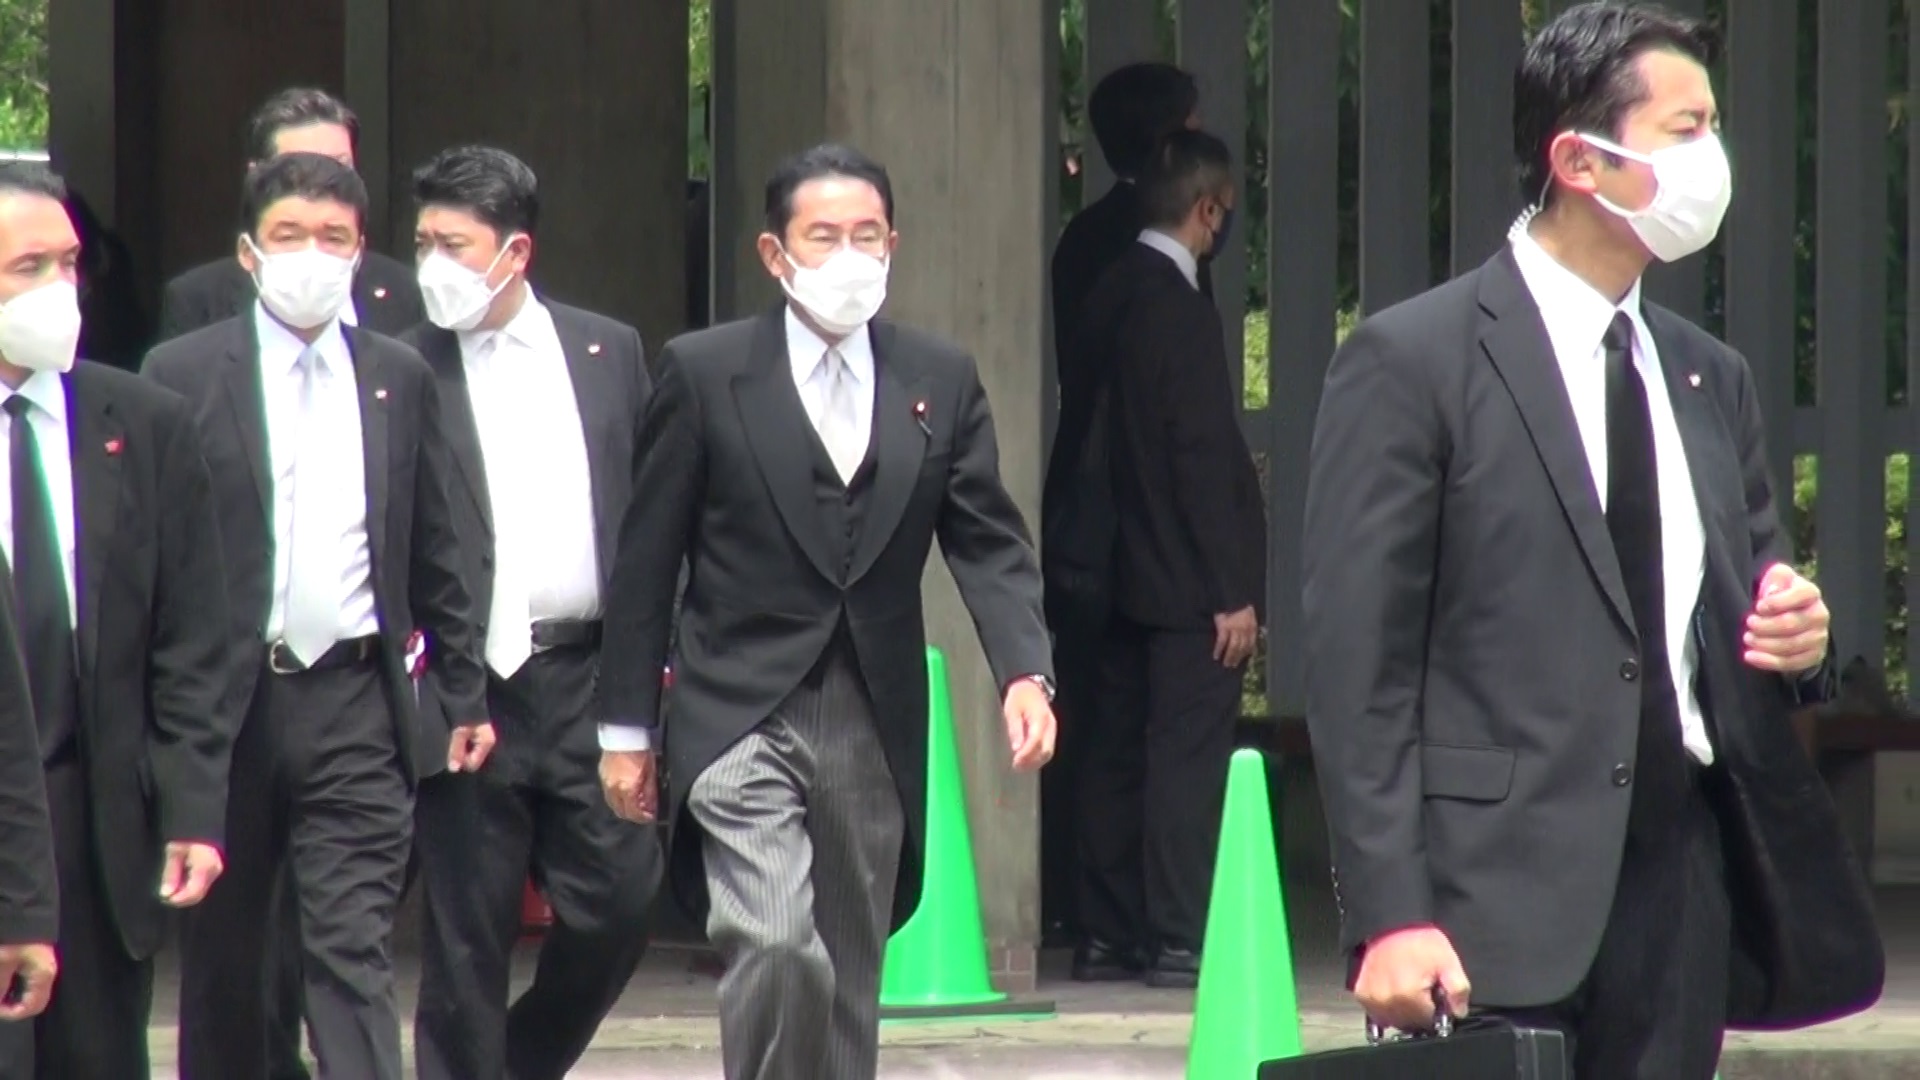 The Prime Minister Offers Prayers at Chidorigafuchi National Cemetery